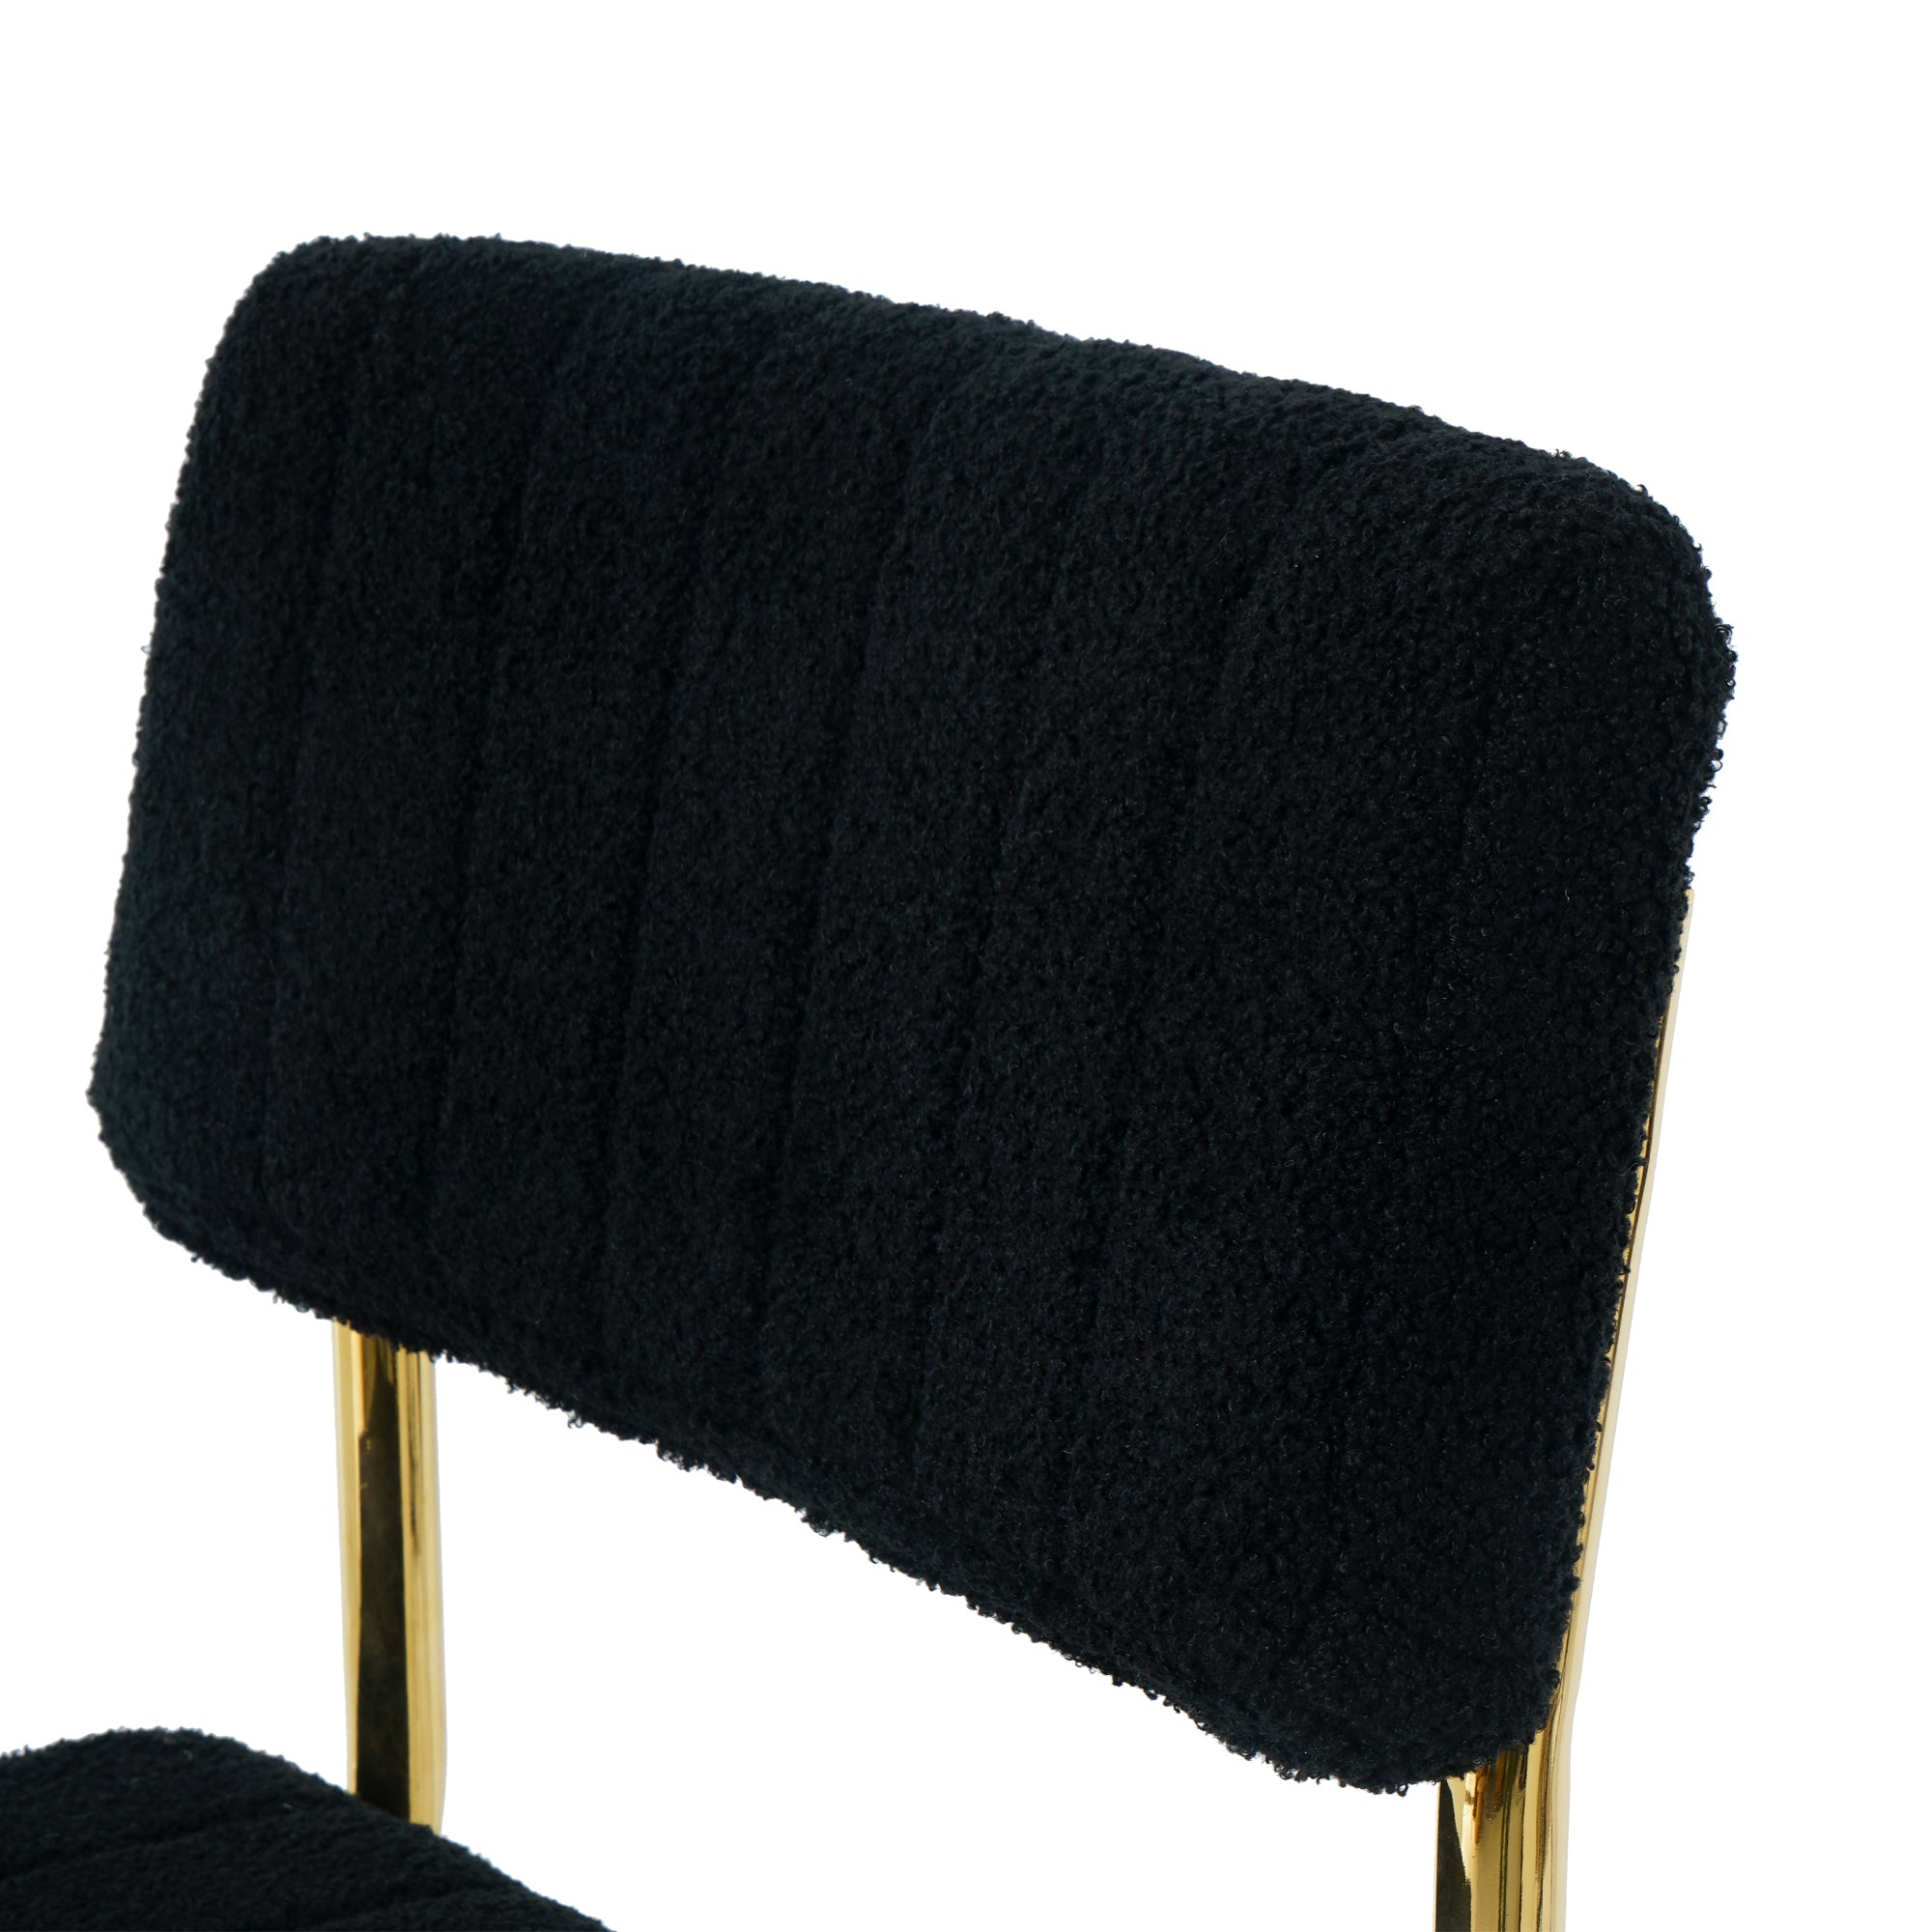 Luxury Dining Black Chairs with Gold Metal Legs (Set of 4) - Black